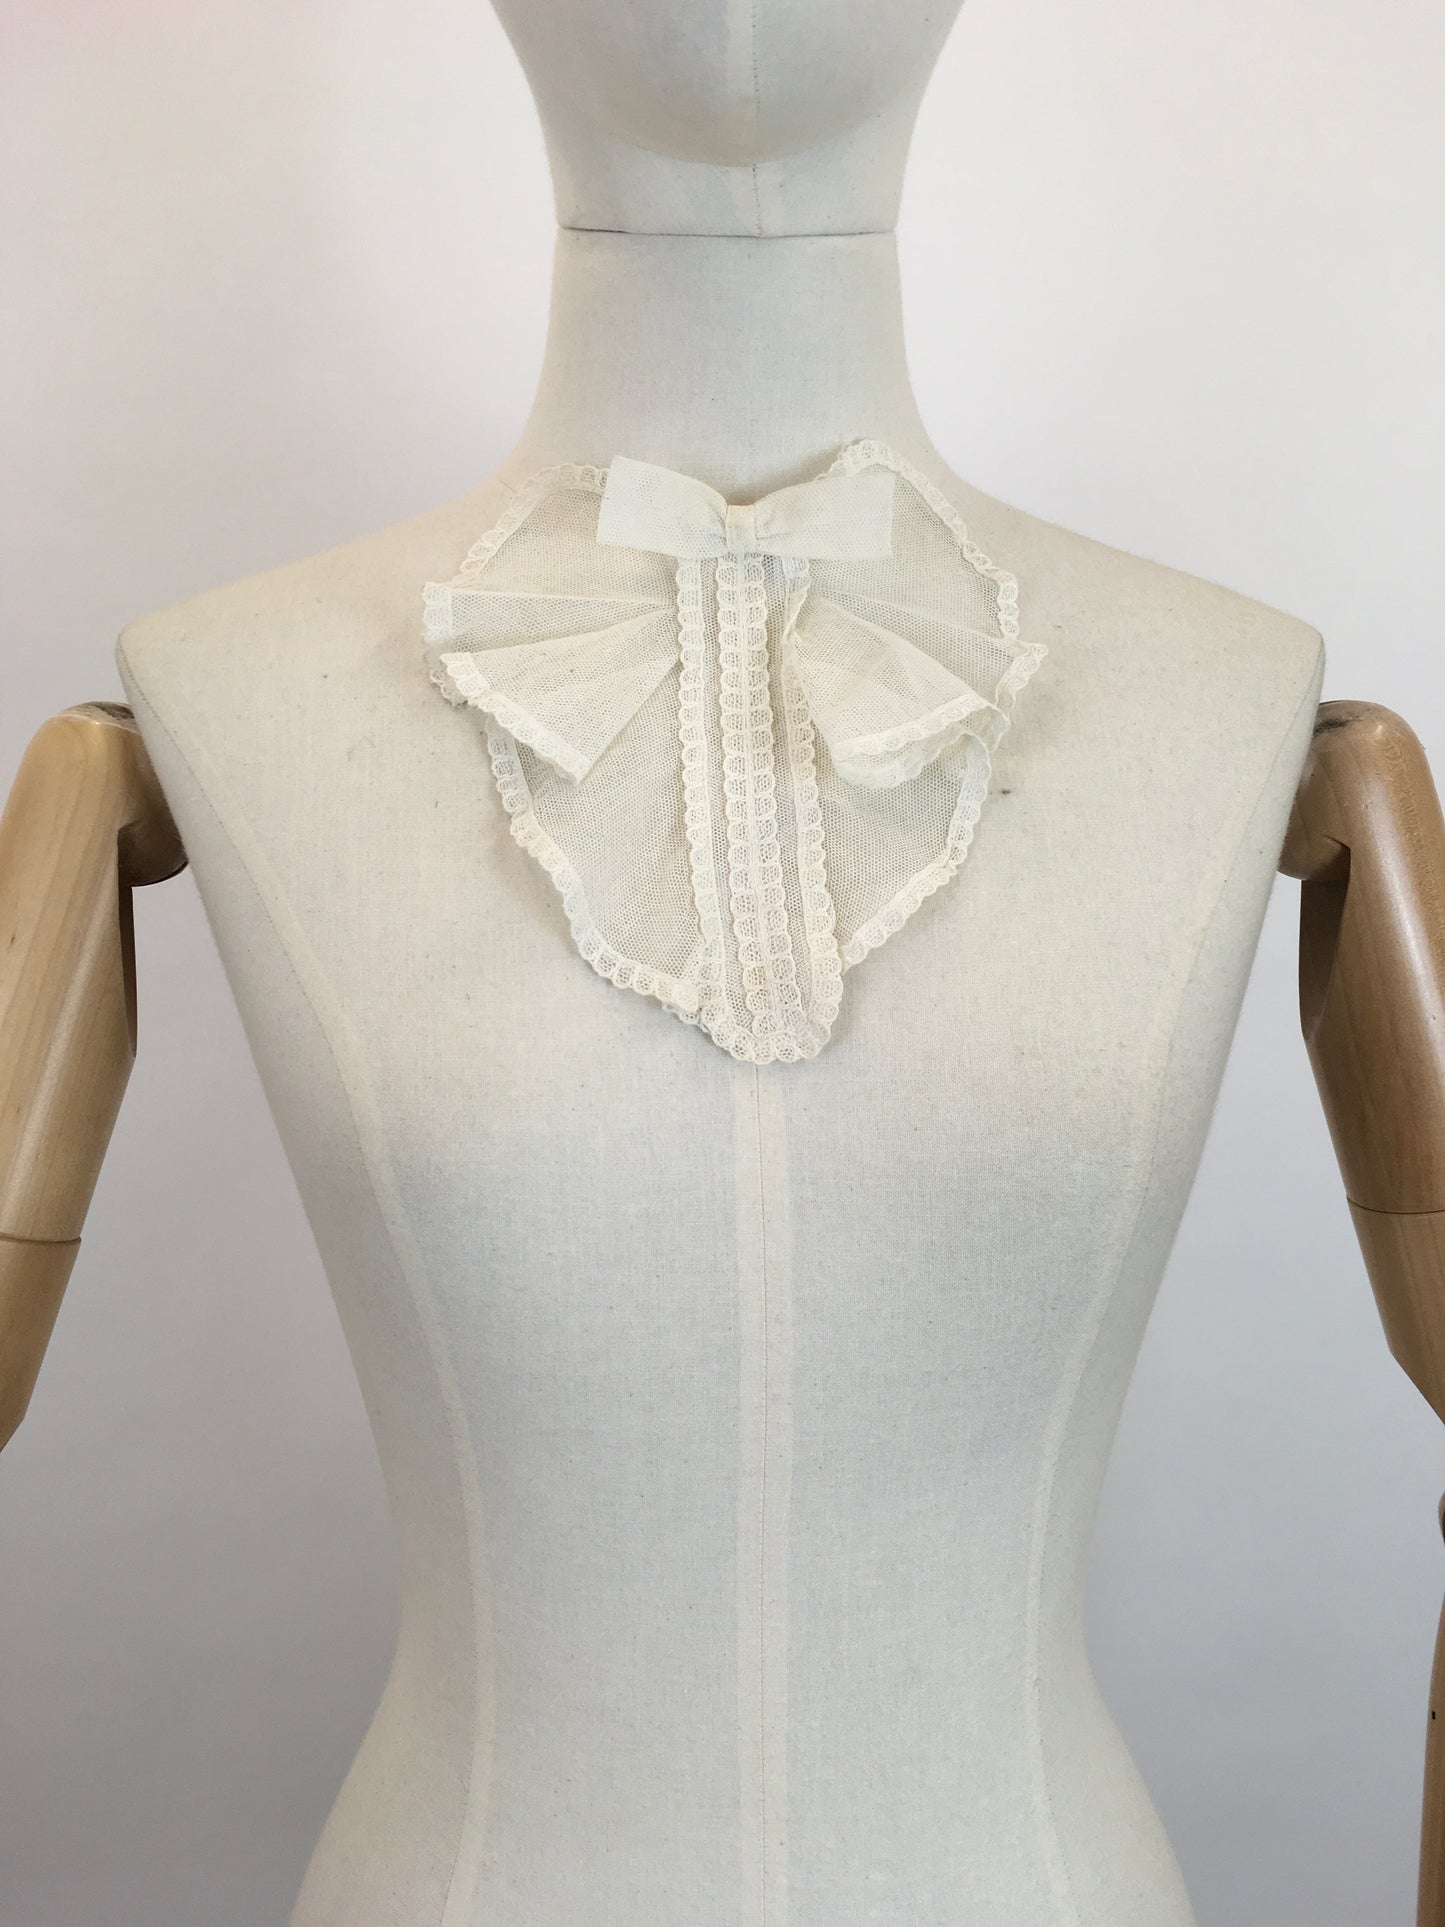 Original 1920's Fabulous Dickie - Made From A Fine Net with Lace And Bow Adornment